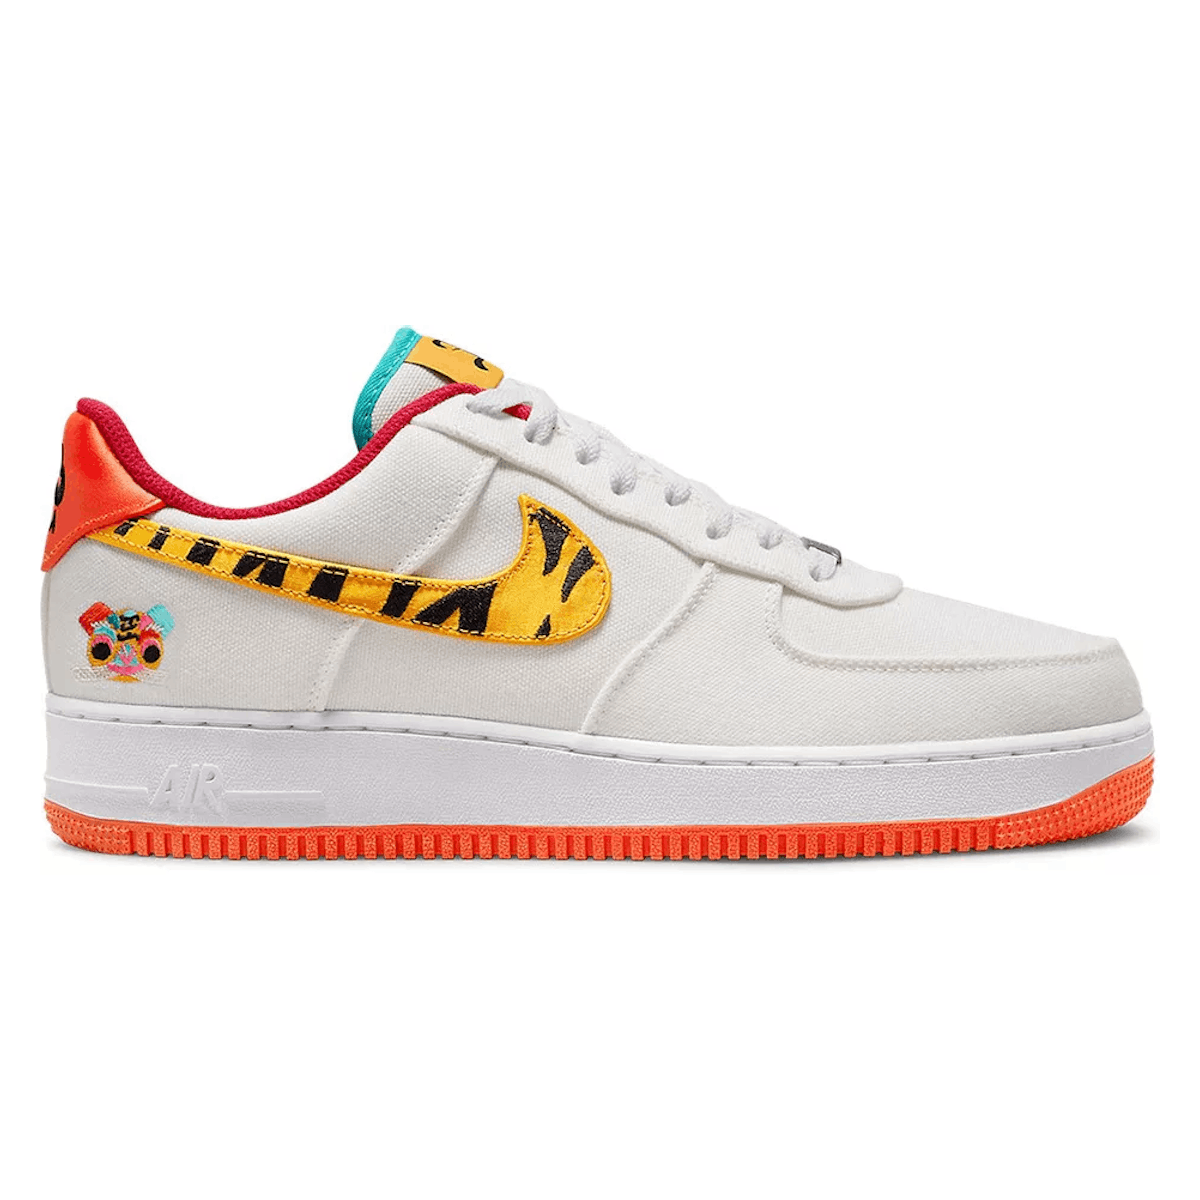 Nike Air Force 1 Low "Year Of The Tiger"